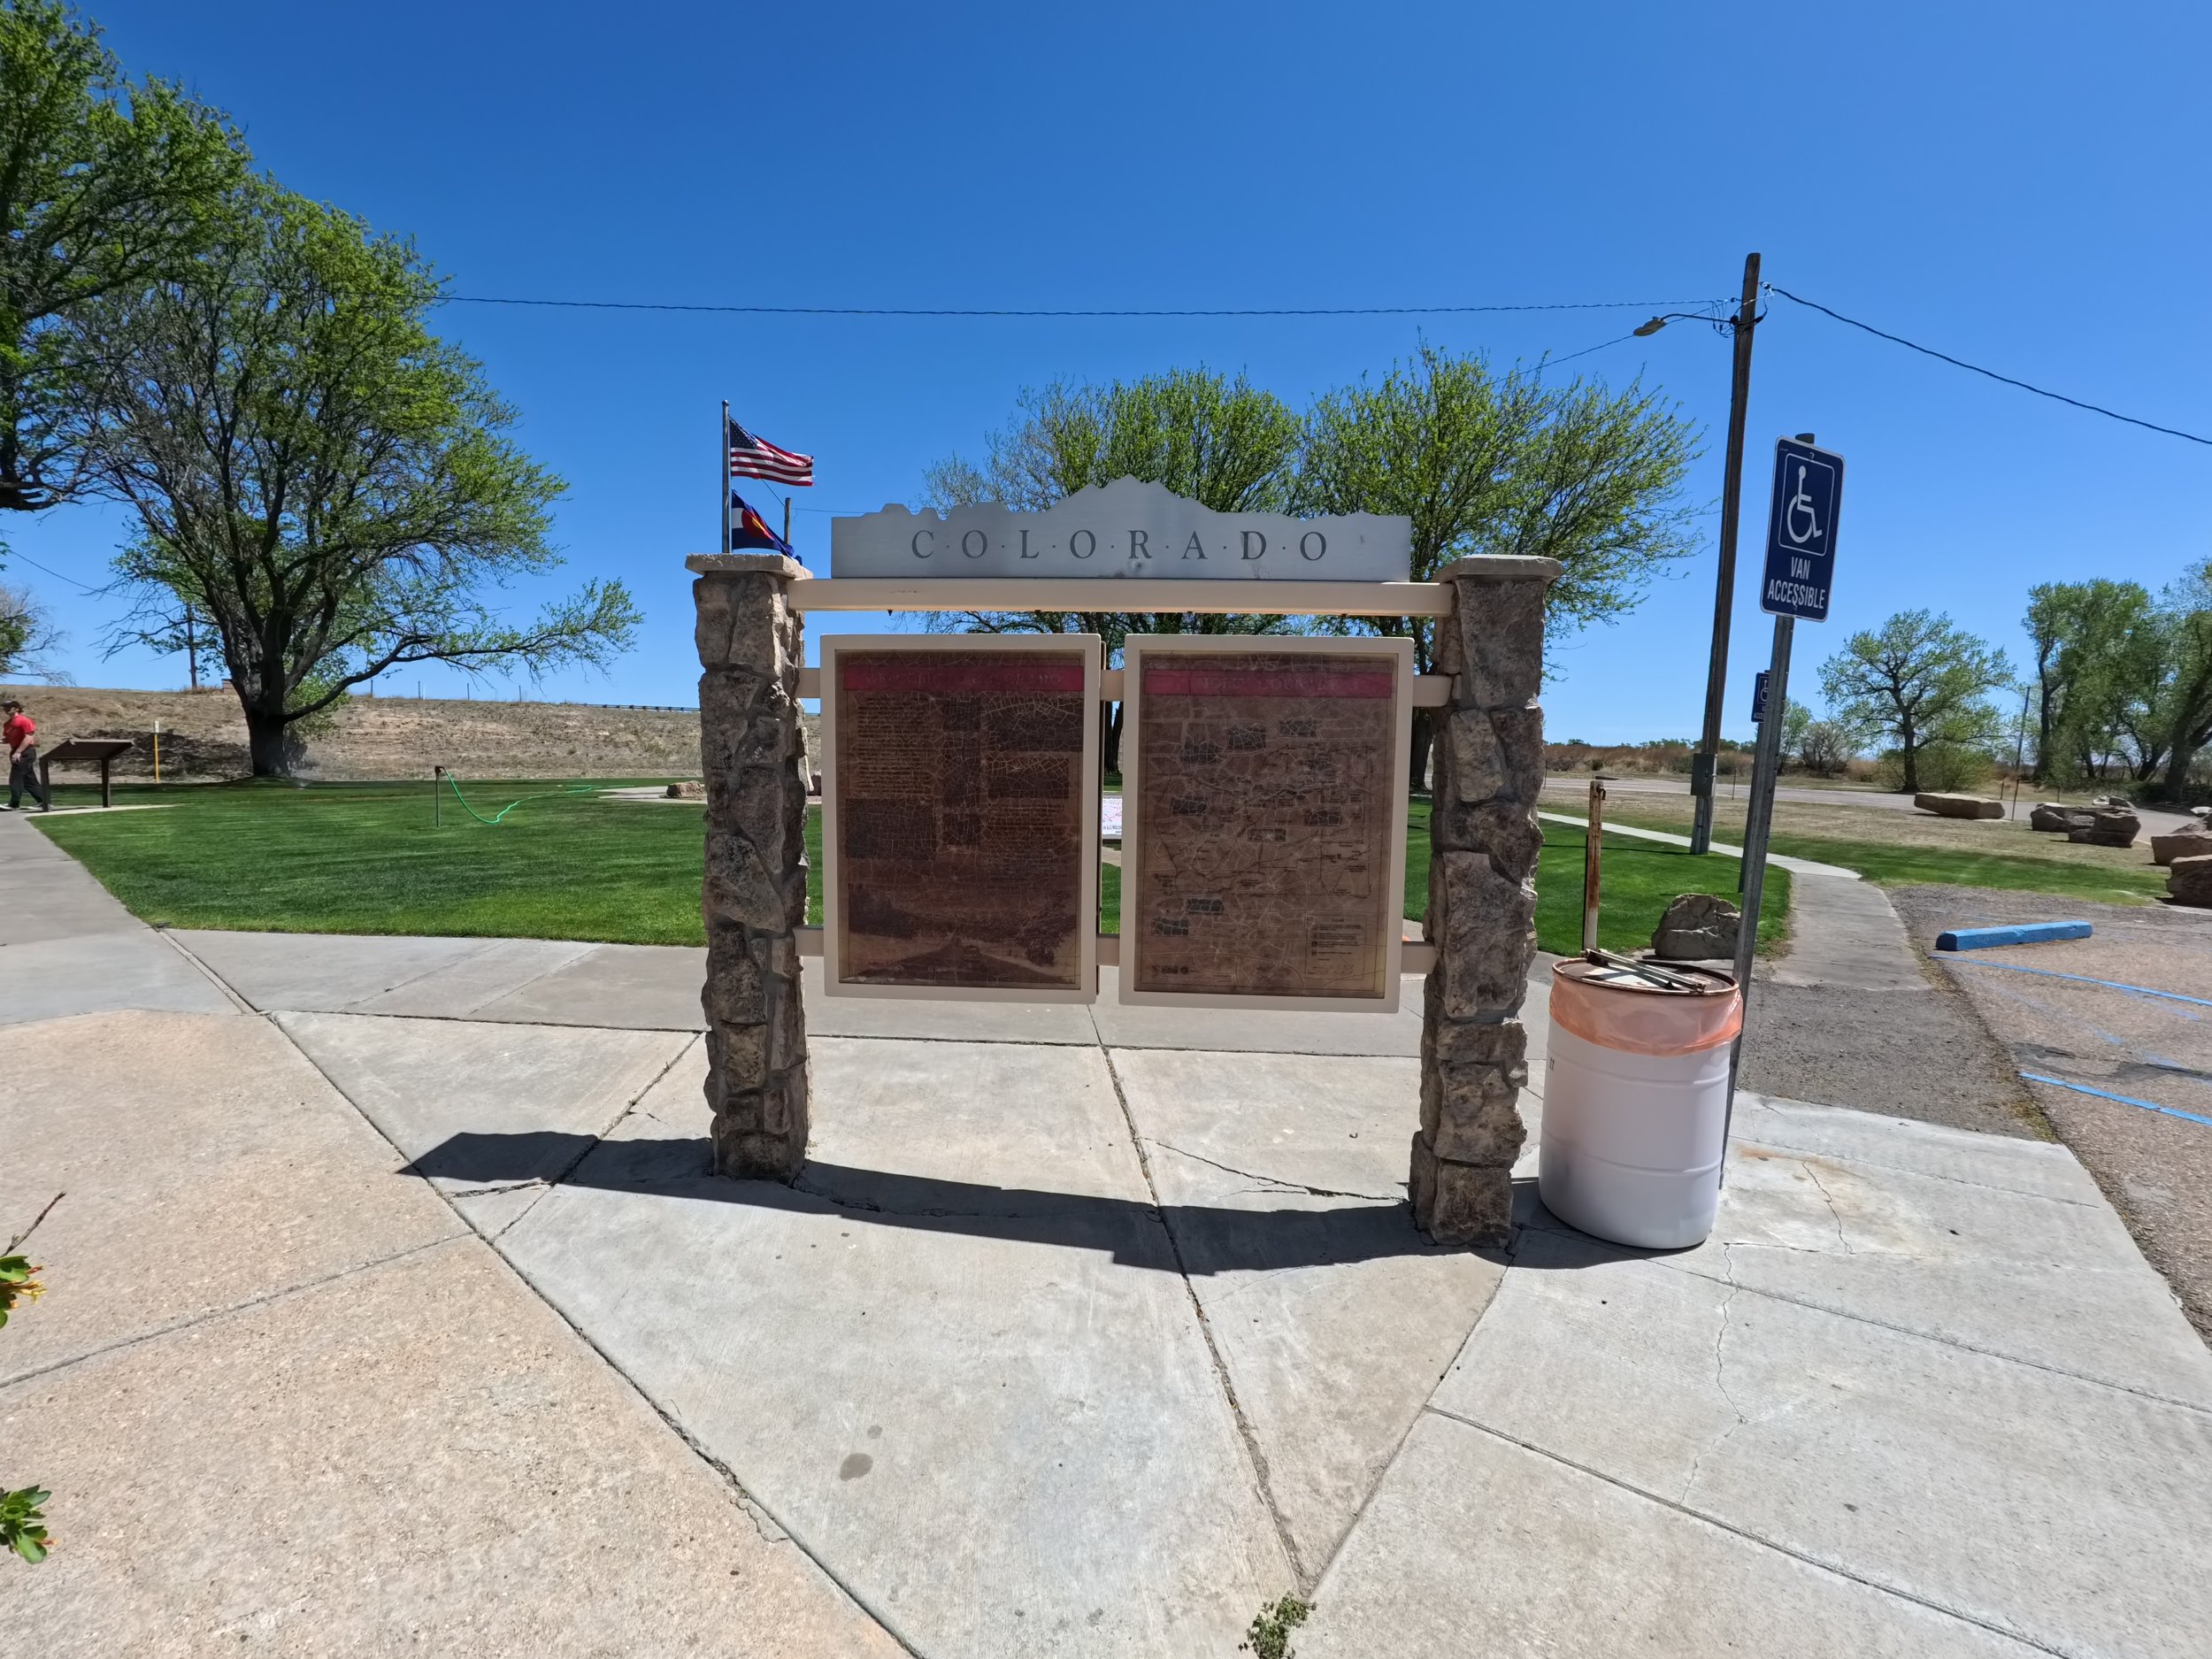 240502-colorado-sign-at-holly-rest-stop.jpg